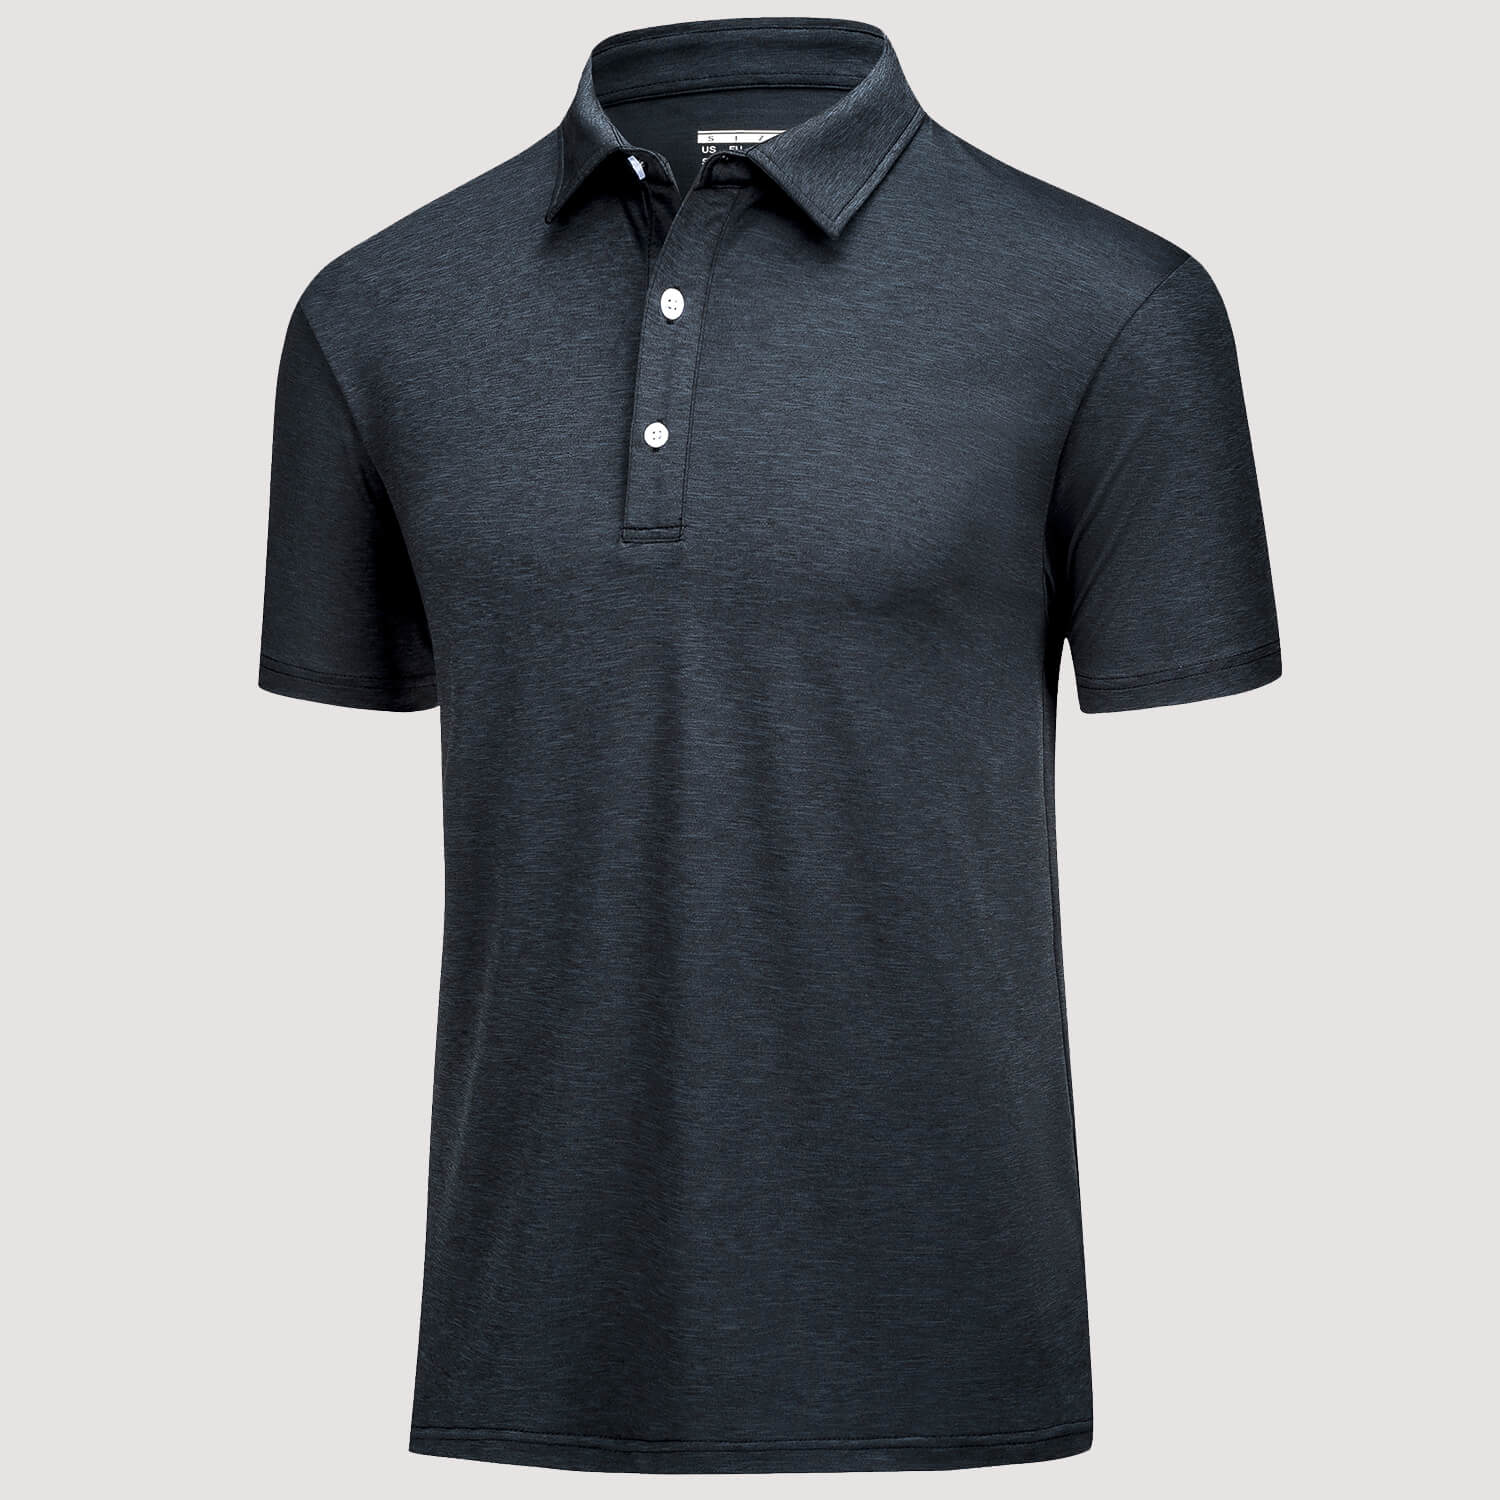 Men's Golf Polo T-Shirts with Buttons Moisture Wicking Sports Shirts